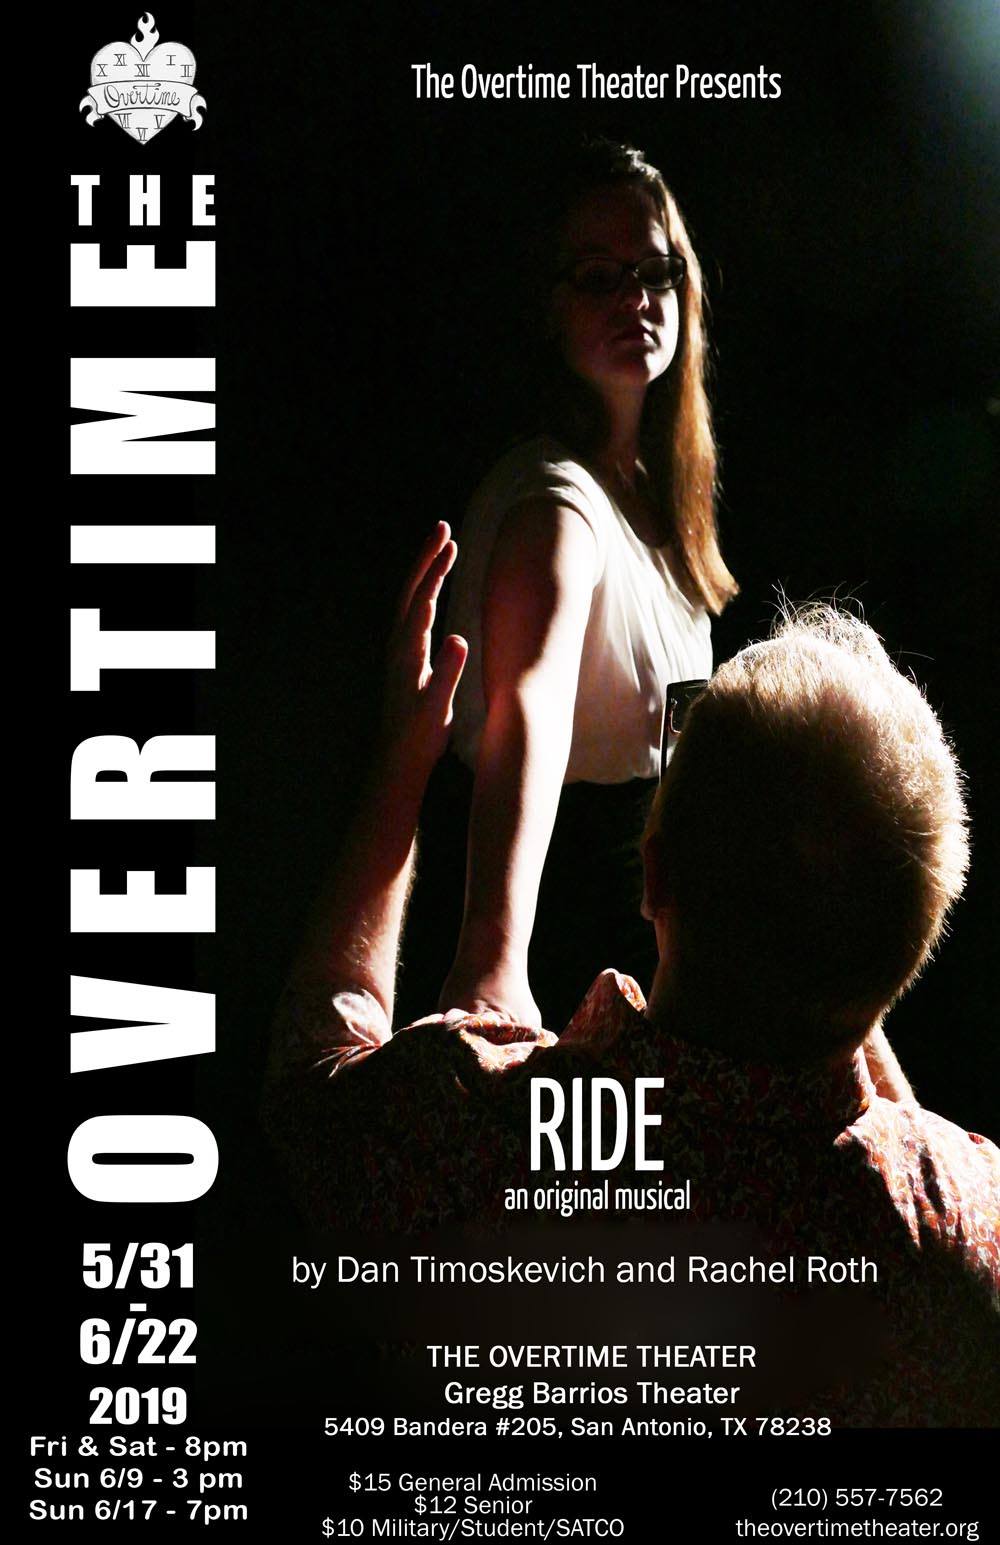 Ride, the musical by Overtime Theater